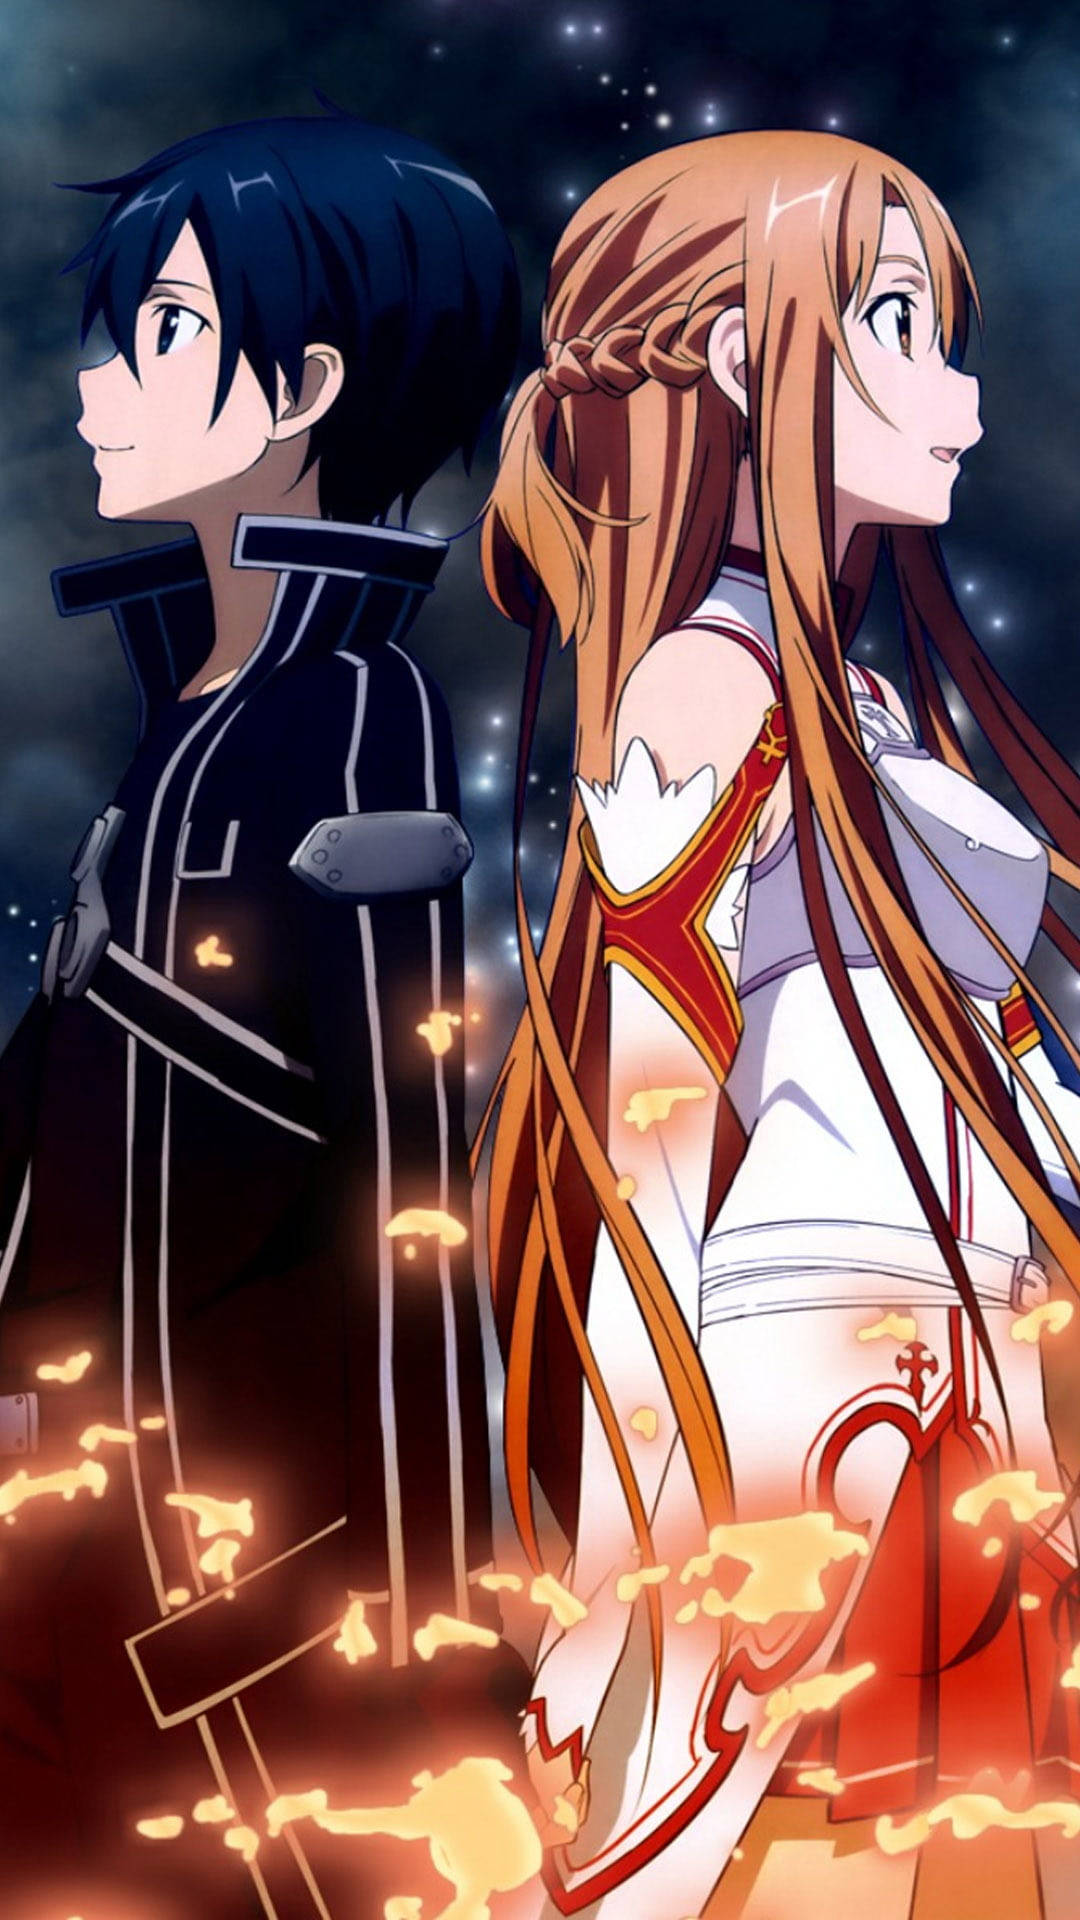 Enchanted Love Story In The Digital Realm - Kirito And Asuna From Sword Art Online